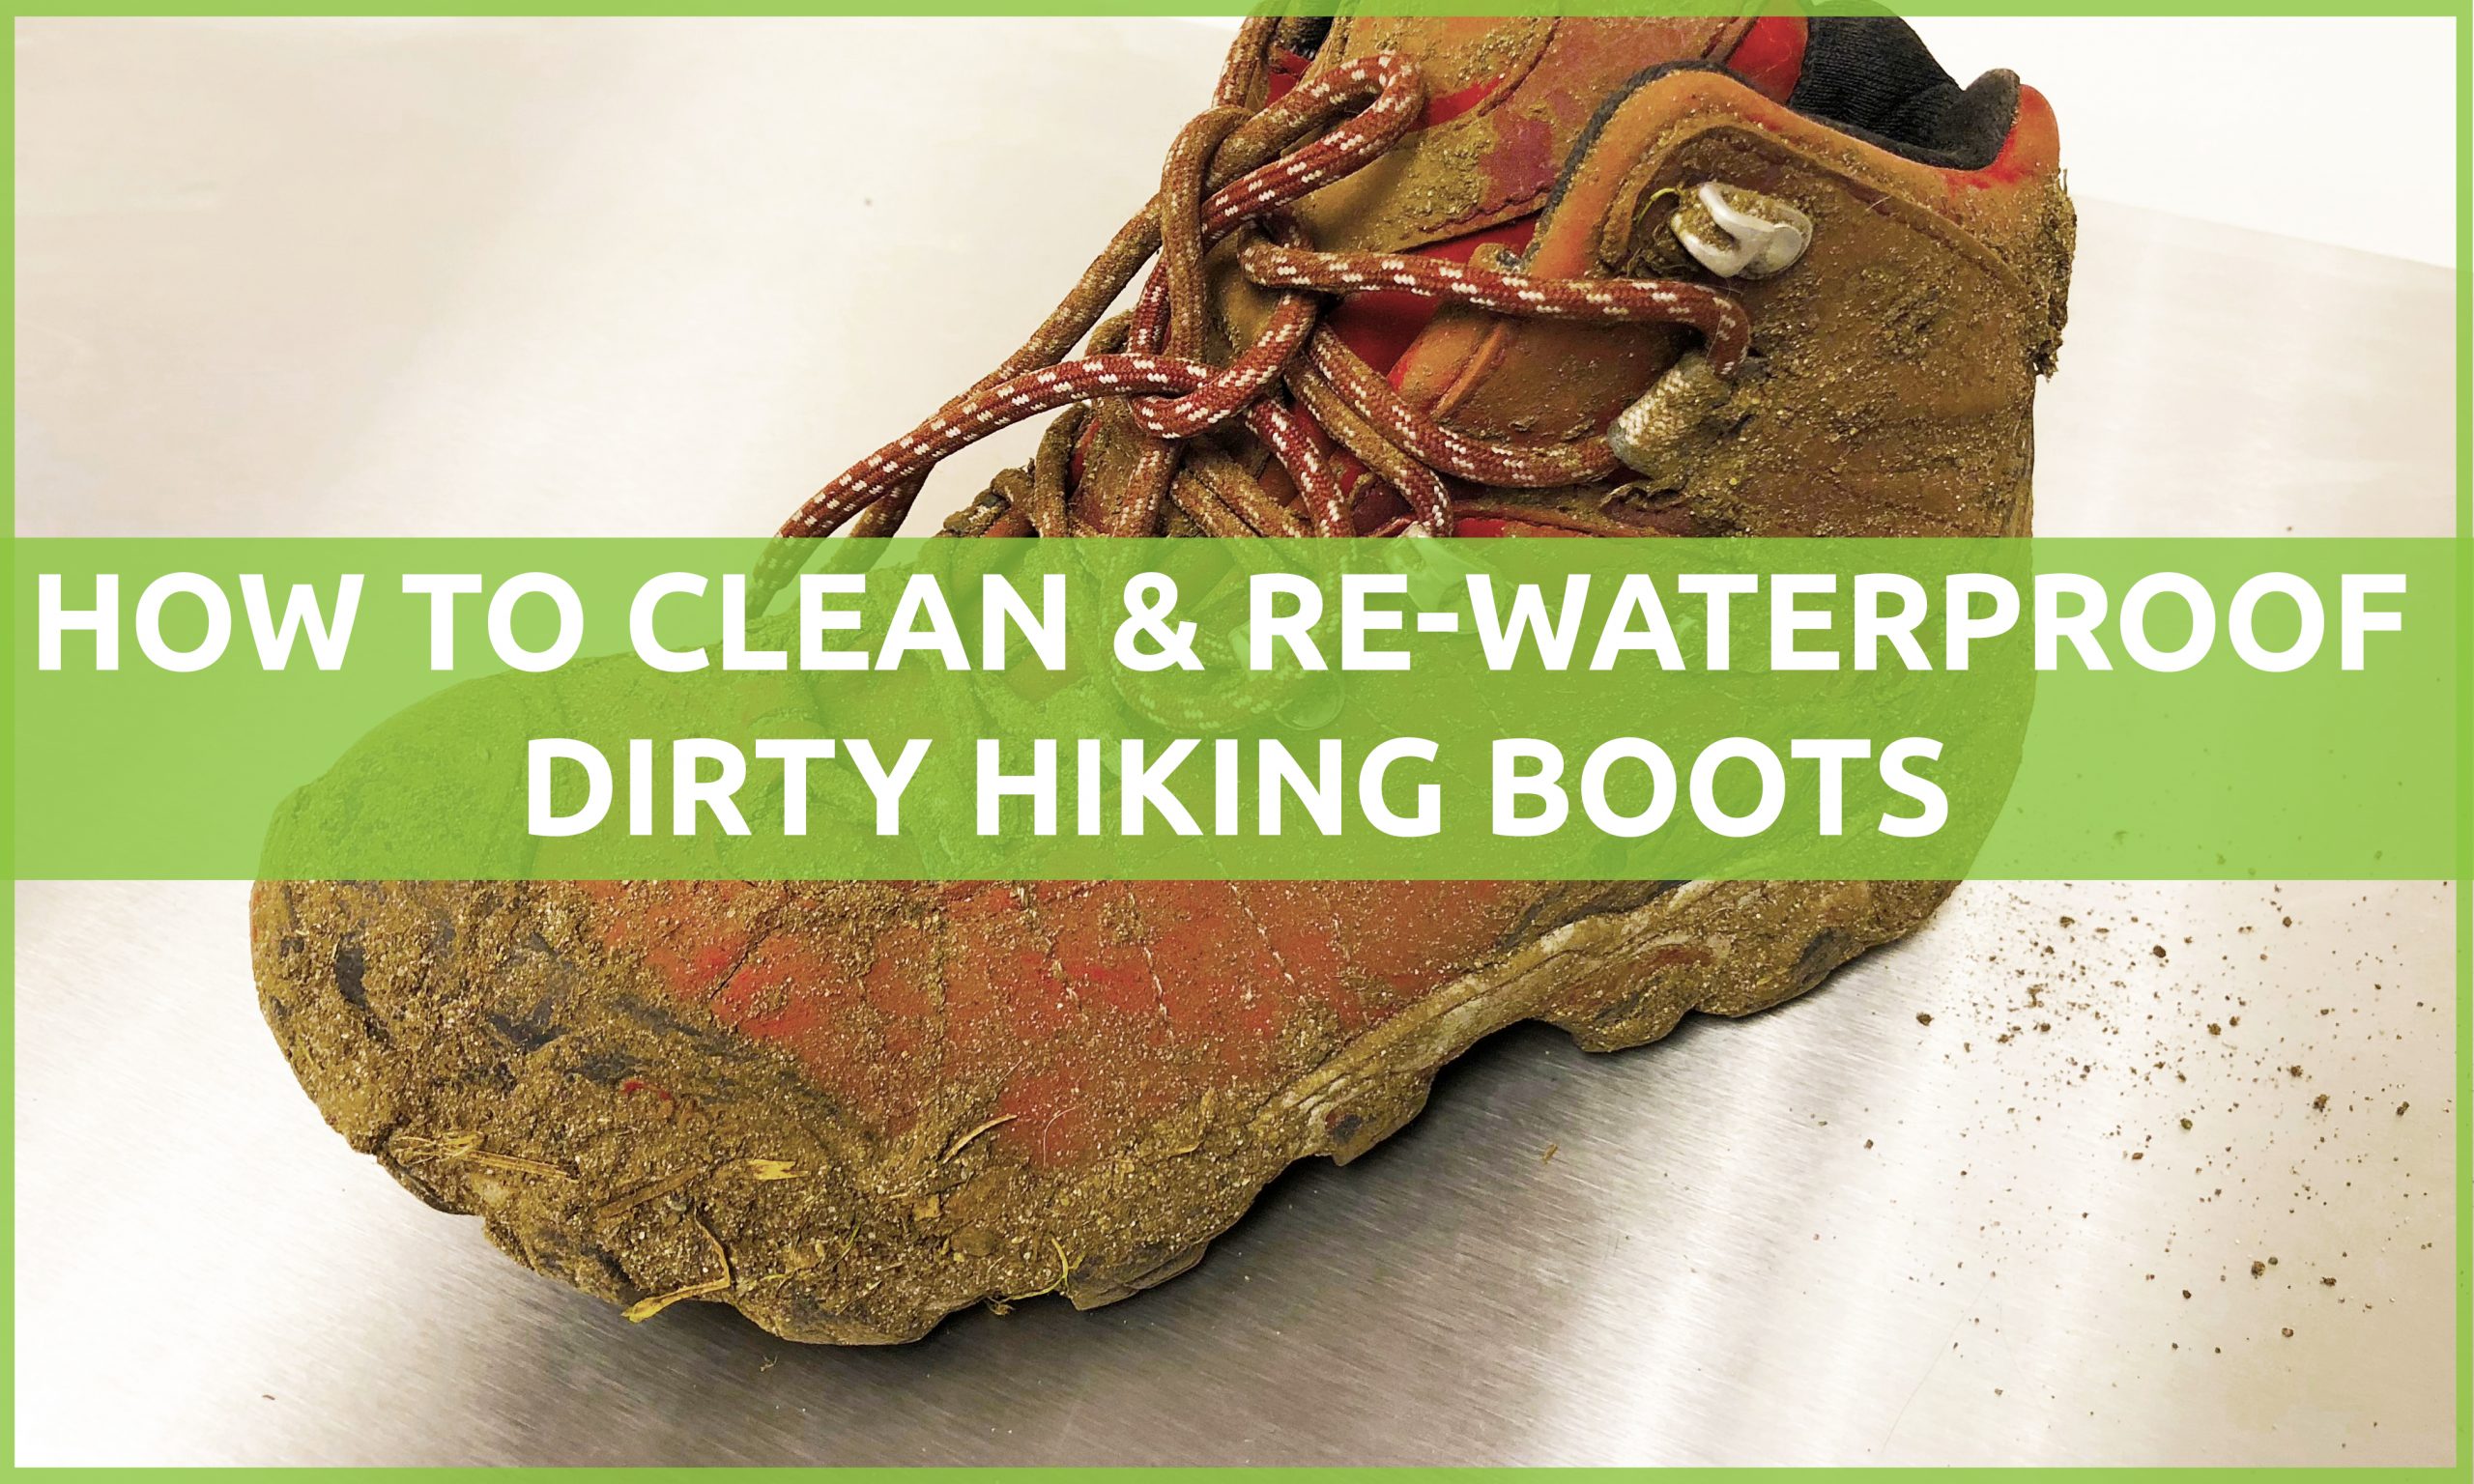 How to Clean & Re-Waterproof Dirty Hiking Boots